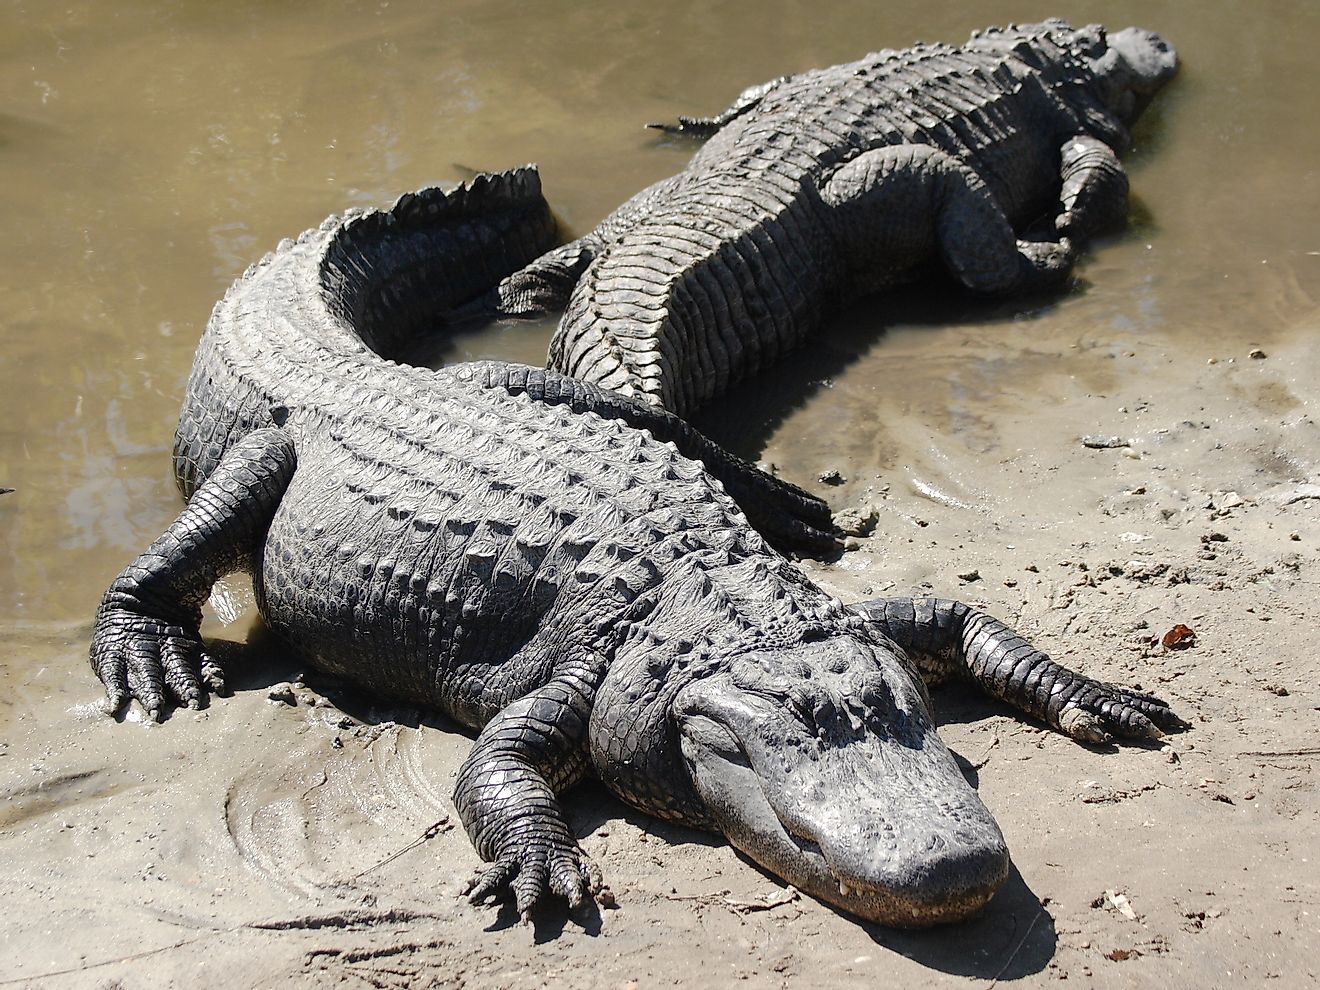 Alligators are also wildlife that is best avoided at home. Image credit: Mfield, Matthew Field/Wikimedia.org